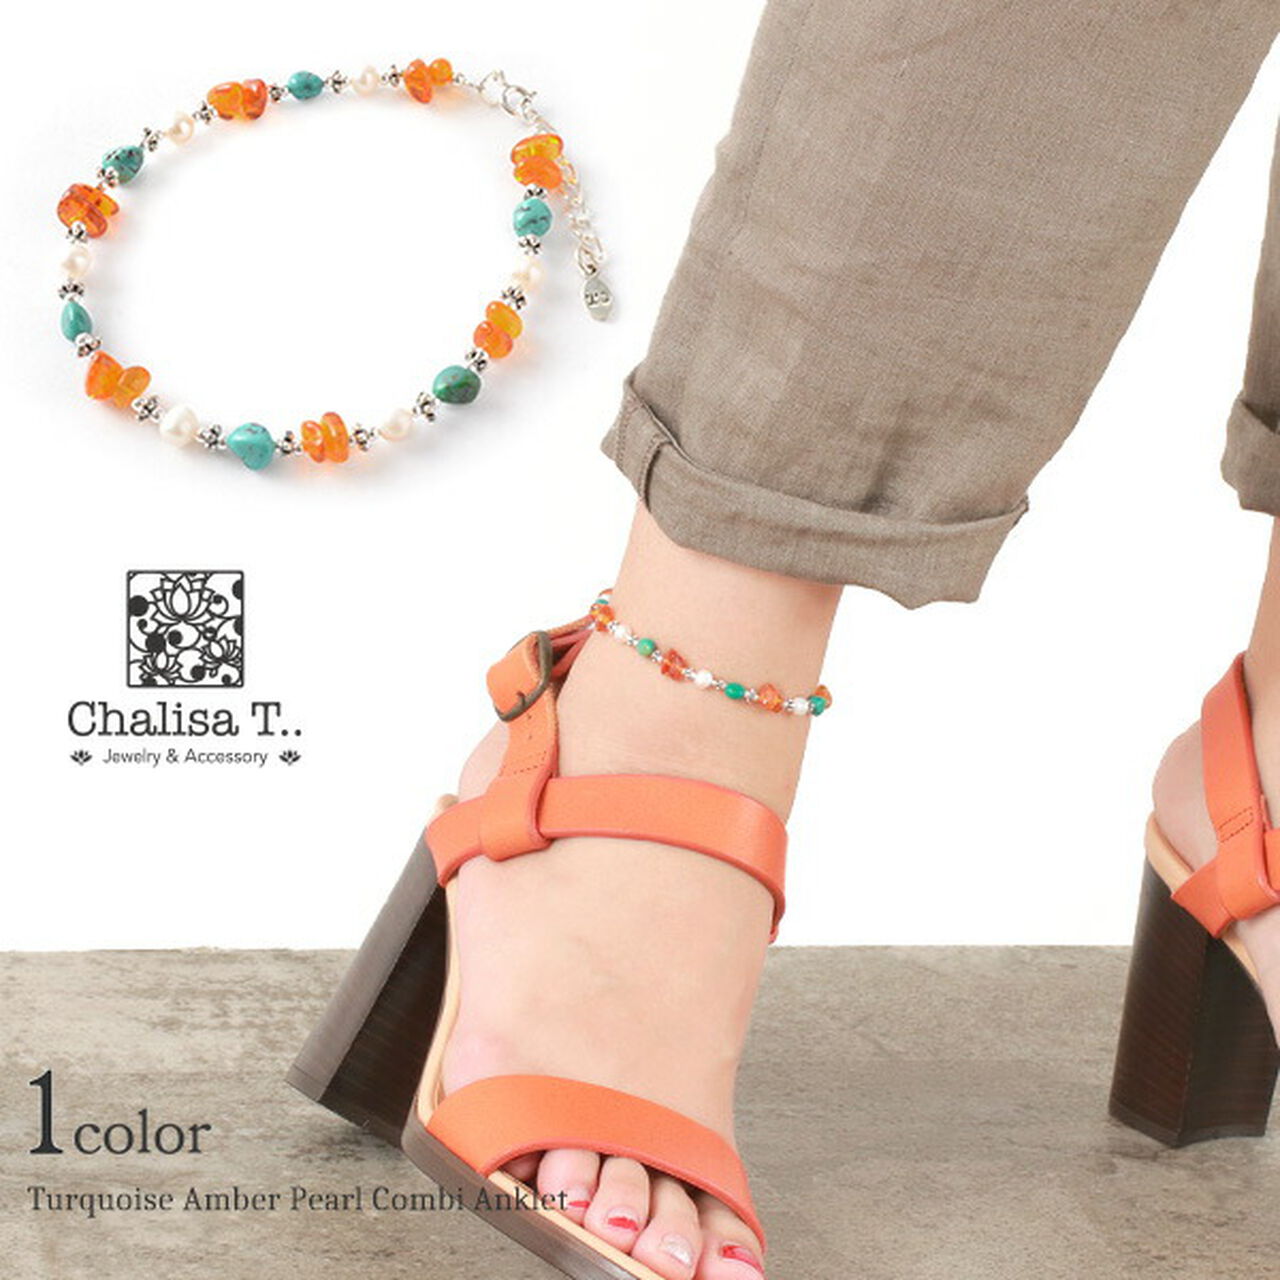 Turquoise Amber Pearl Combi Anklet,, large image number 0